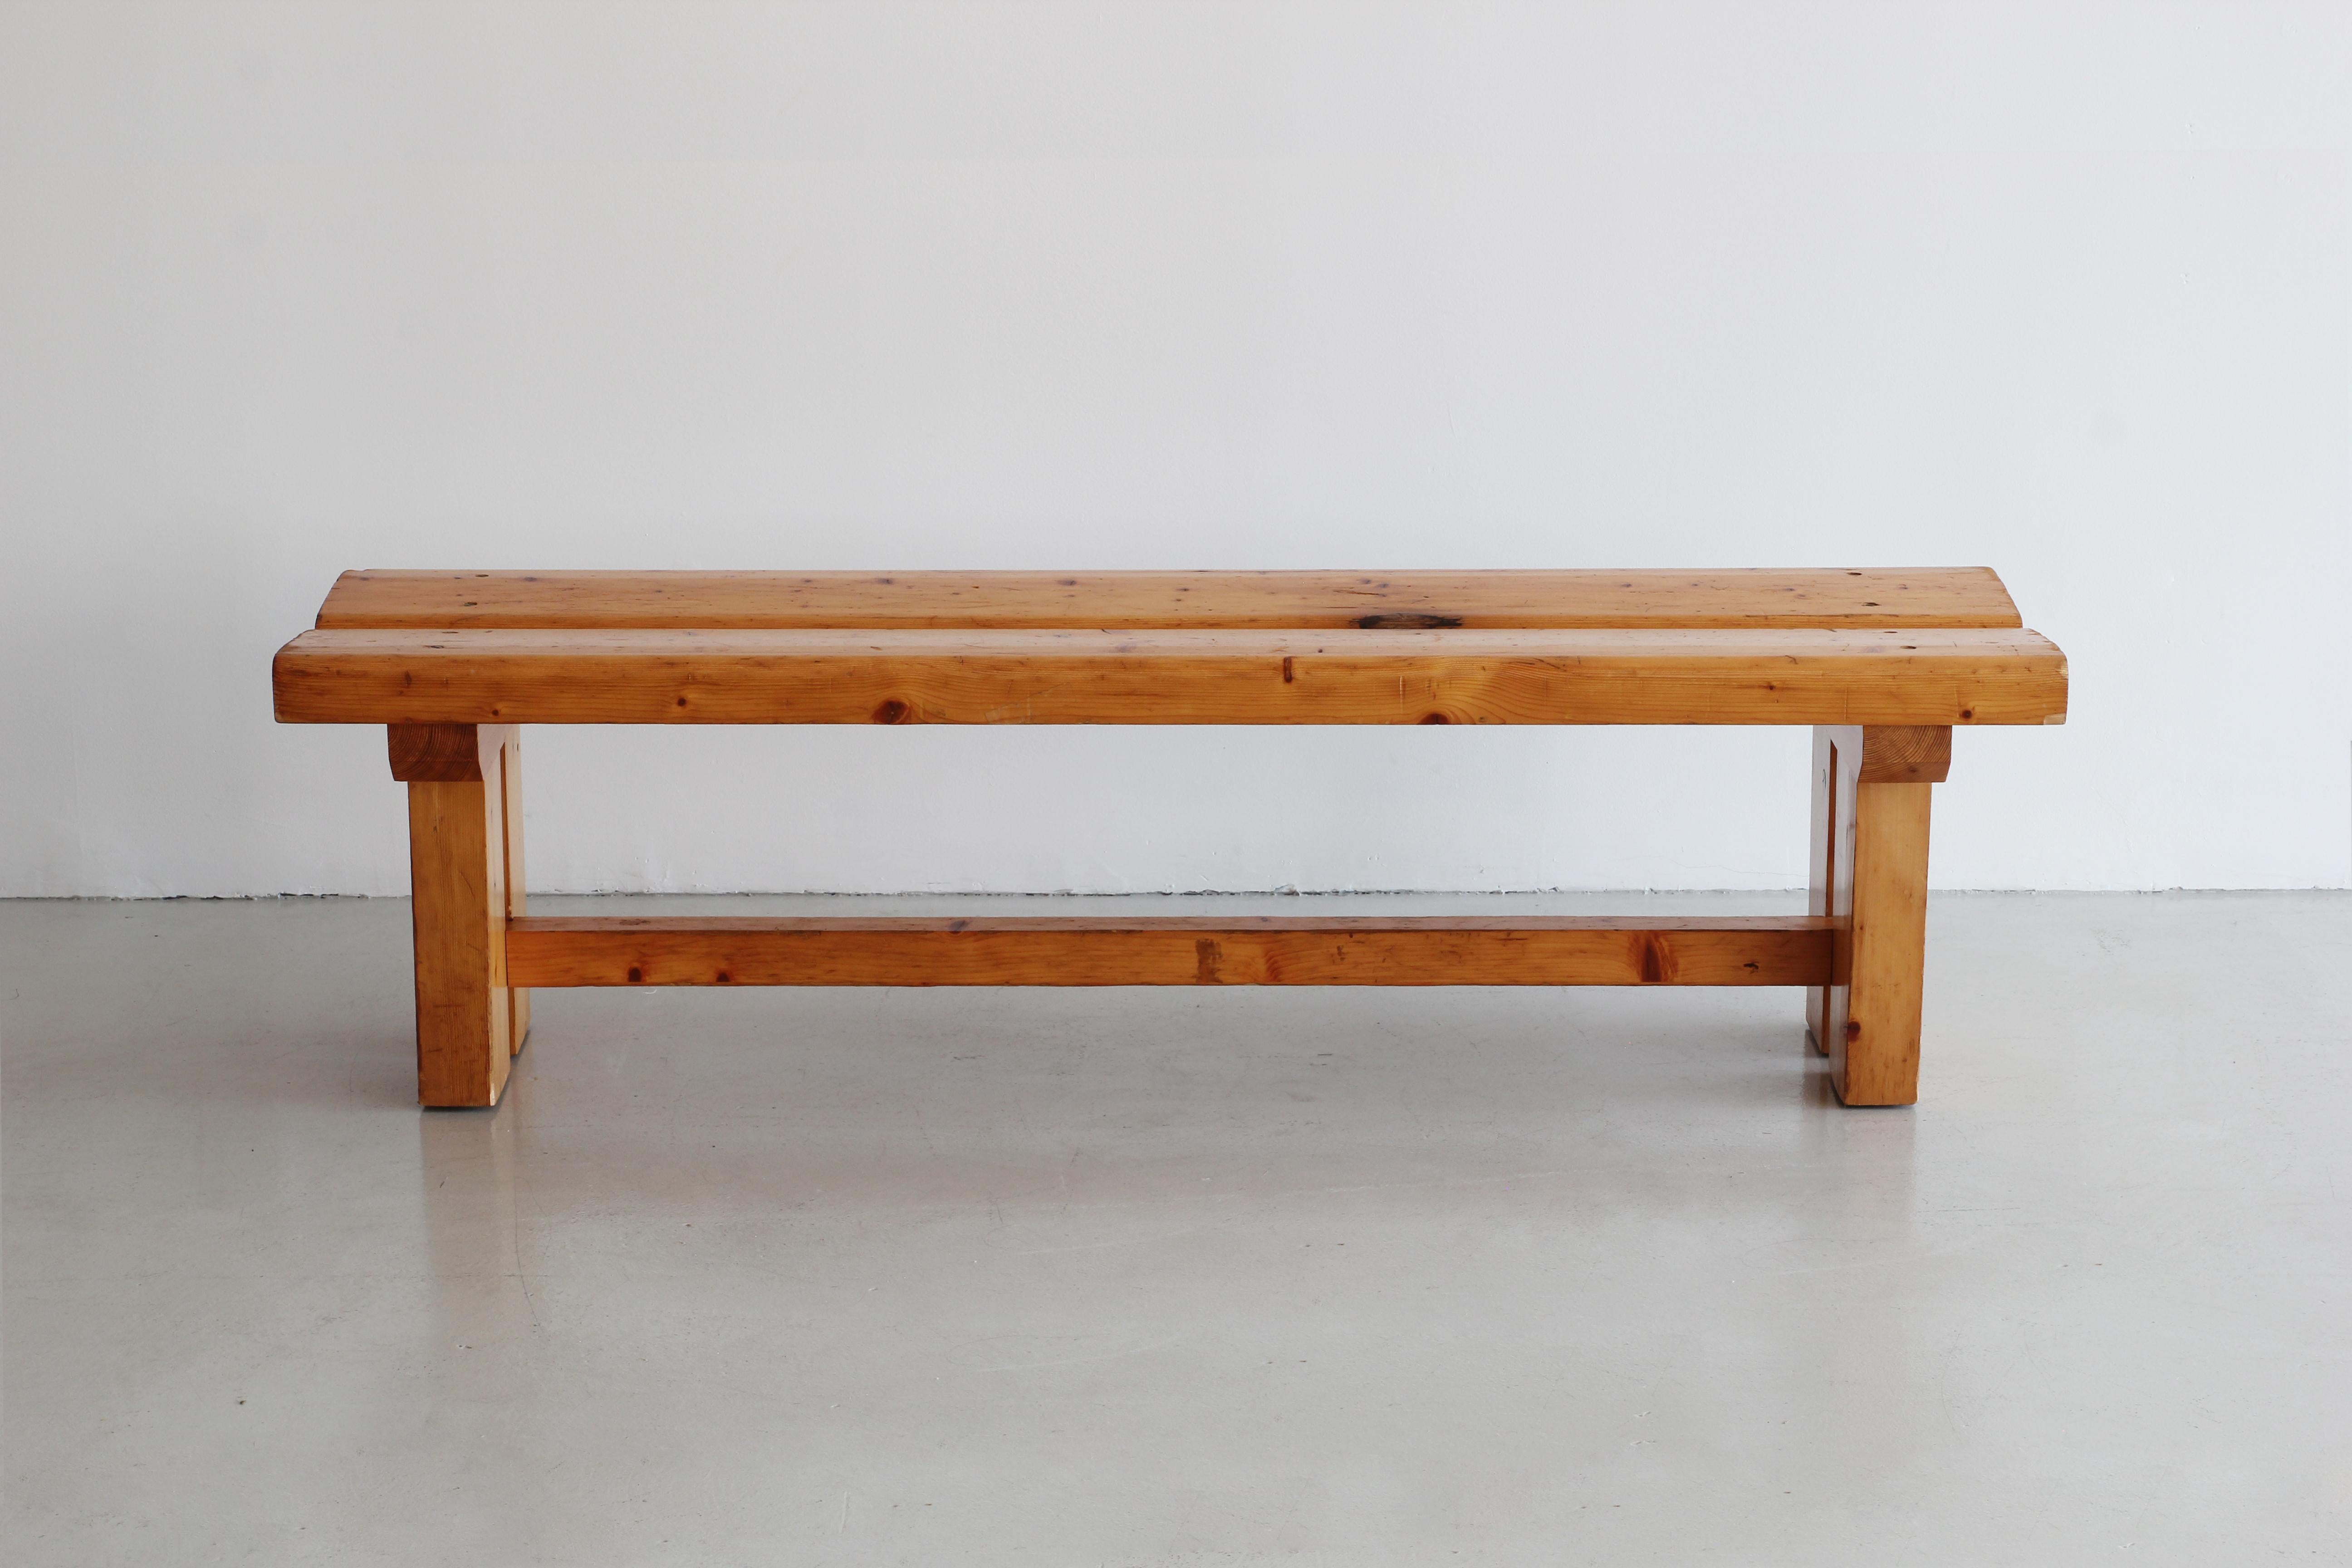 Exquisite bench by Charlotte Perriand for Les Arcs
Wonderful patina to the pine wood with architectural angles.